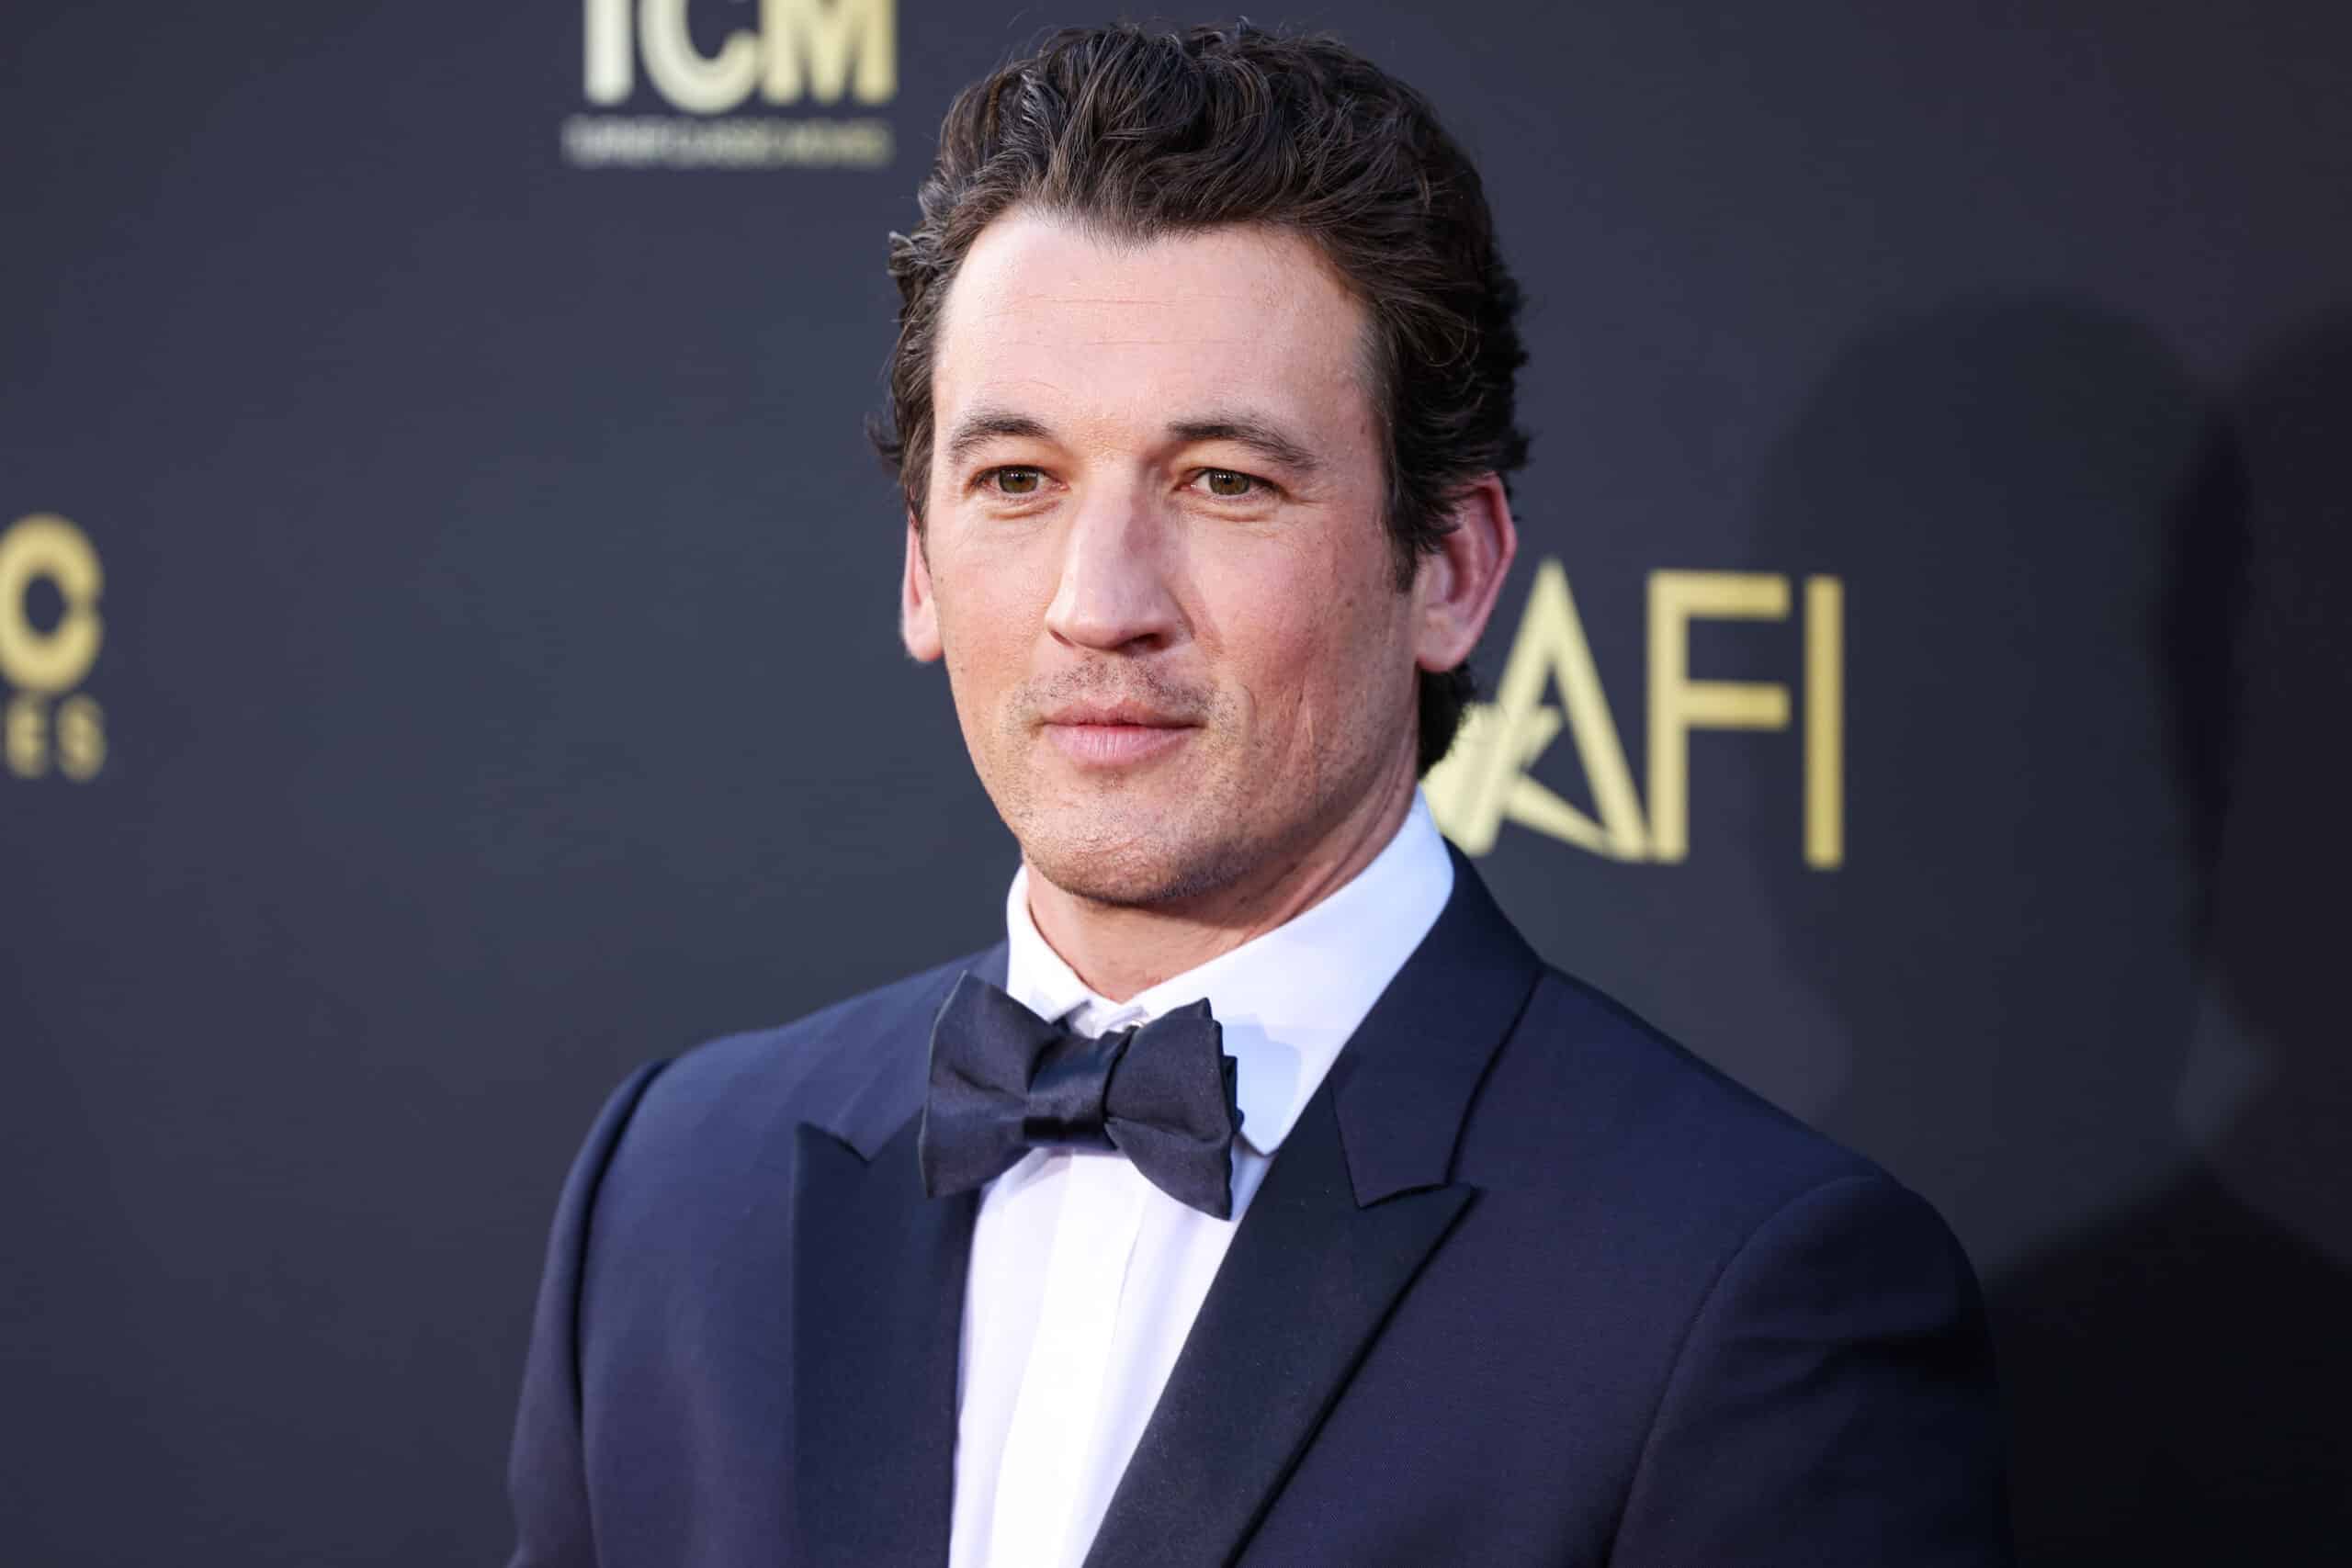 Miles Teller to feature in Paramount